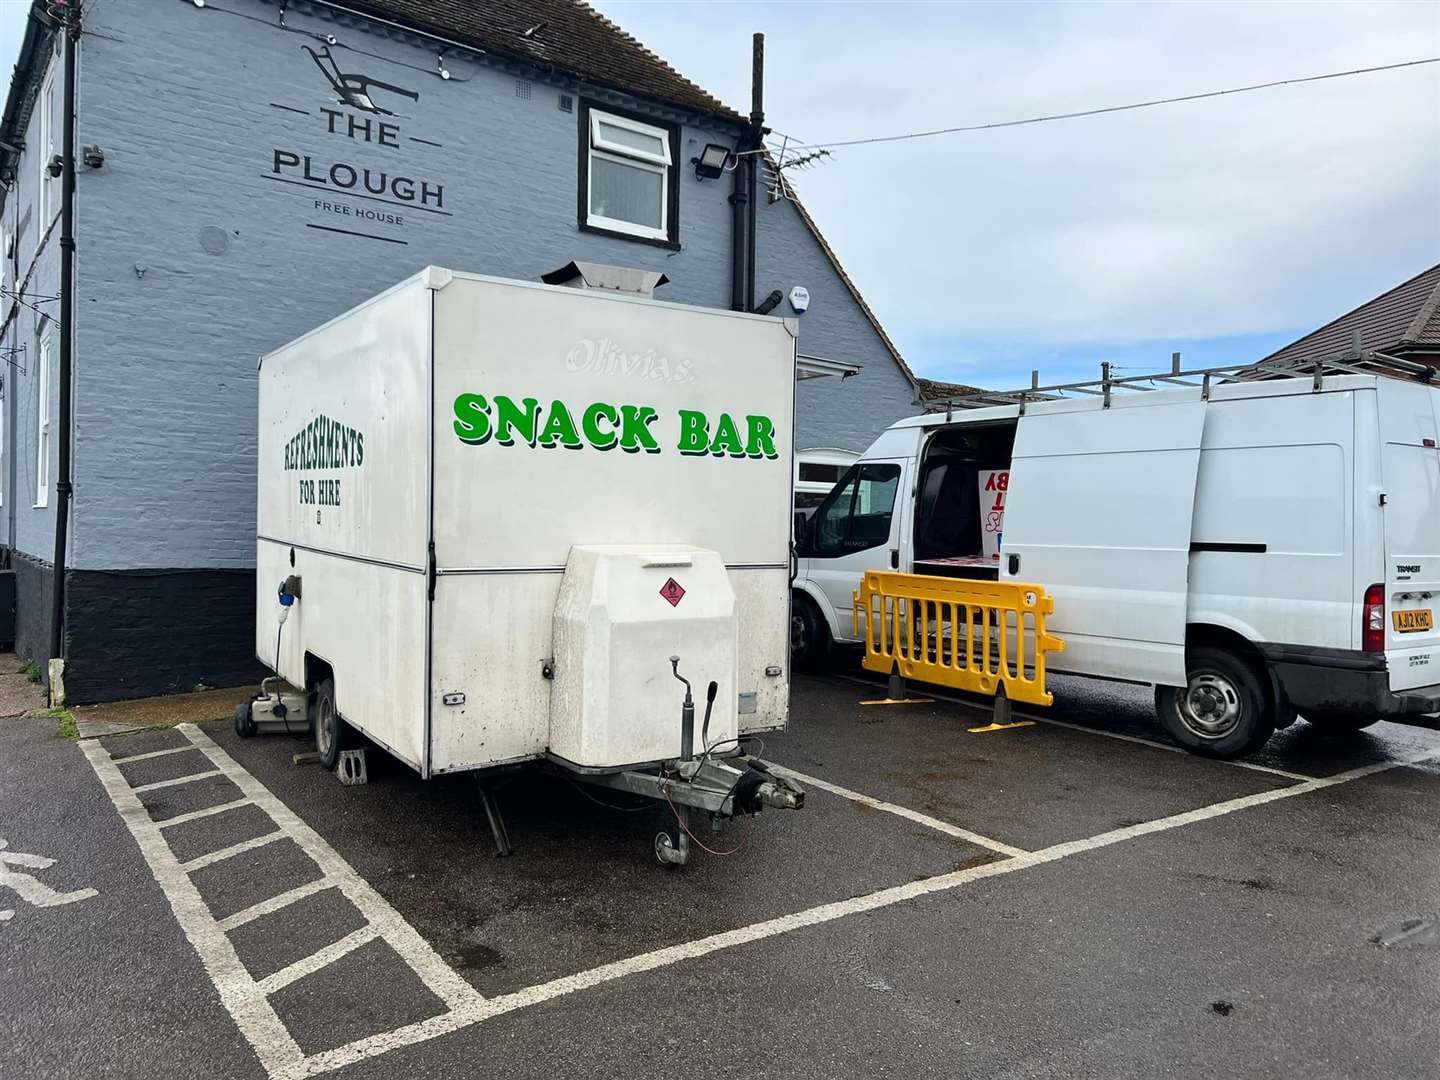 A food van has been set up in New Romney for people without power. Picture: The Plough, New Romney